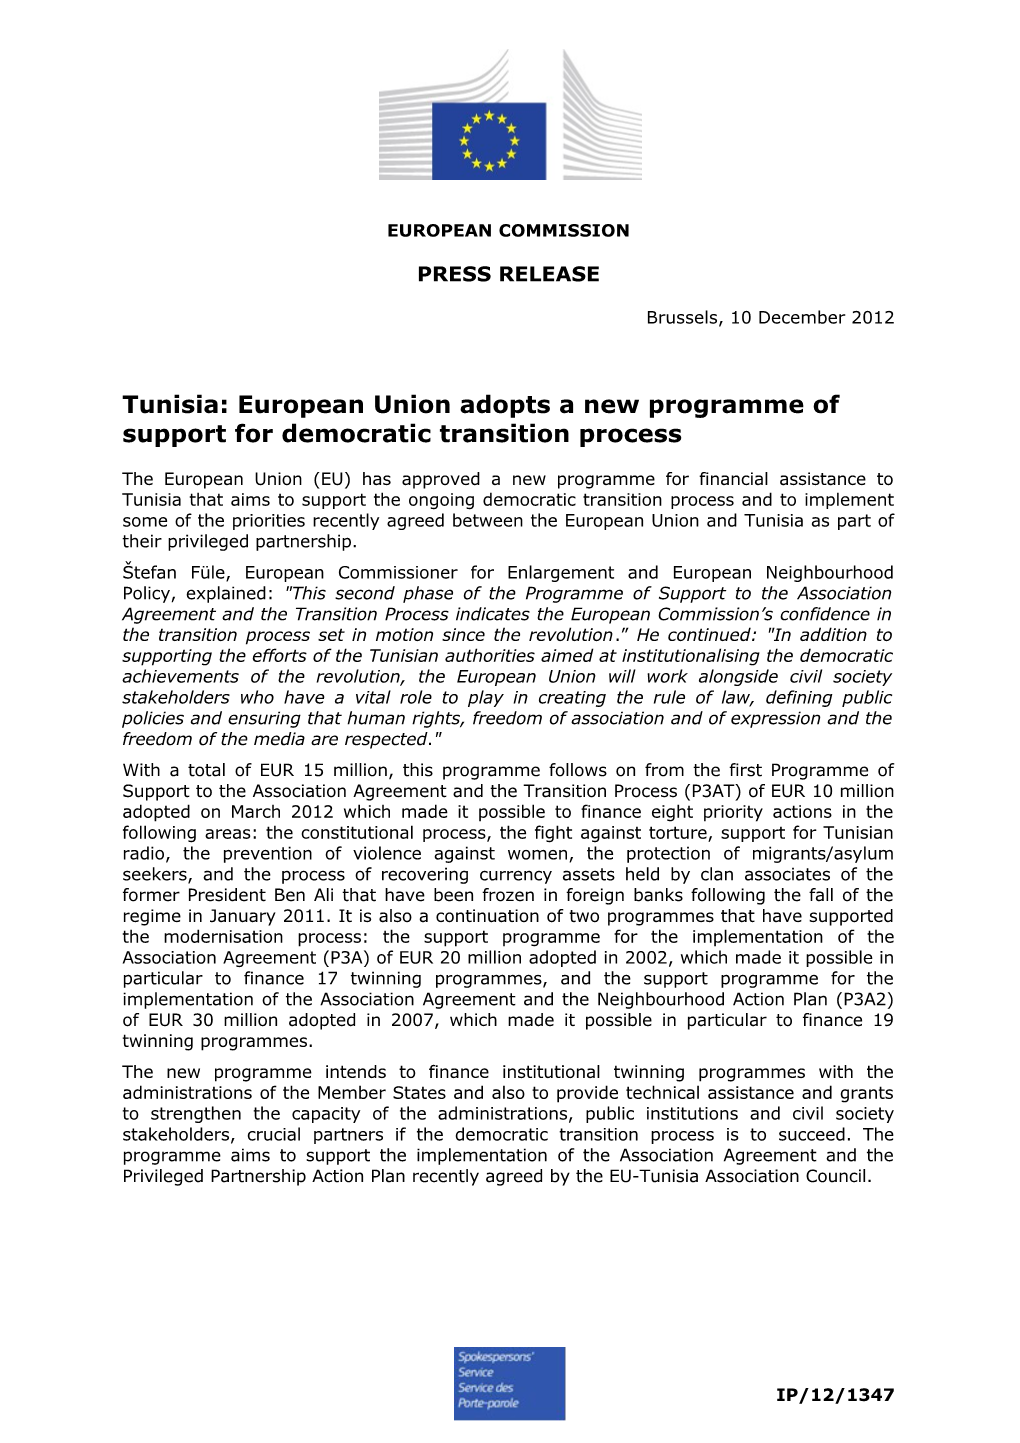 Tunisia: European Union Adopts a New Programme of Support for Democratic Transition Process